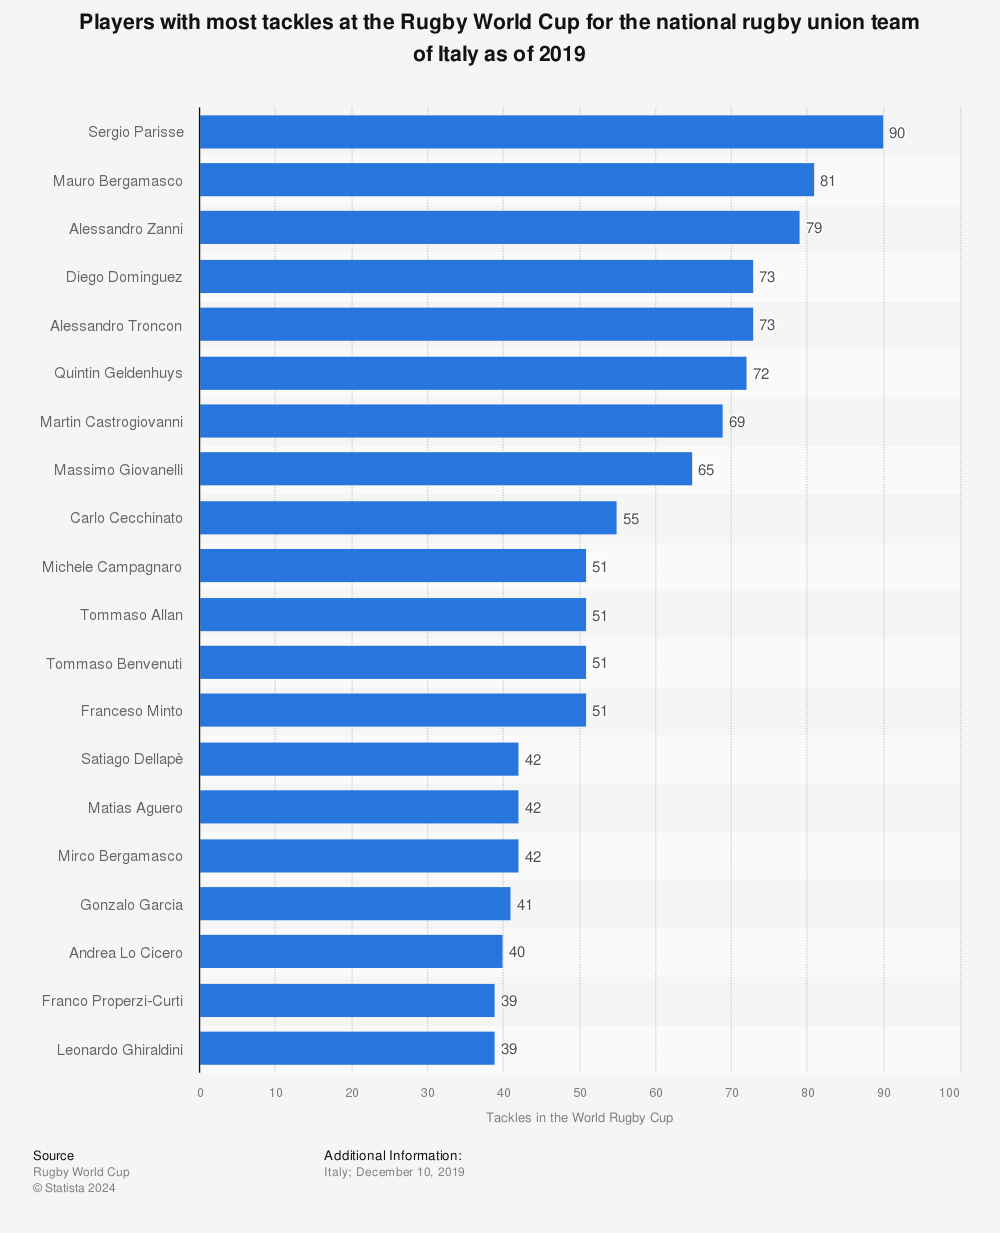 Statistic: Players with most tackles at the Rugby World Cup for the national rugby union team of Italy as of 2019 | Statista